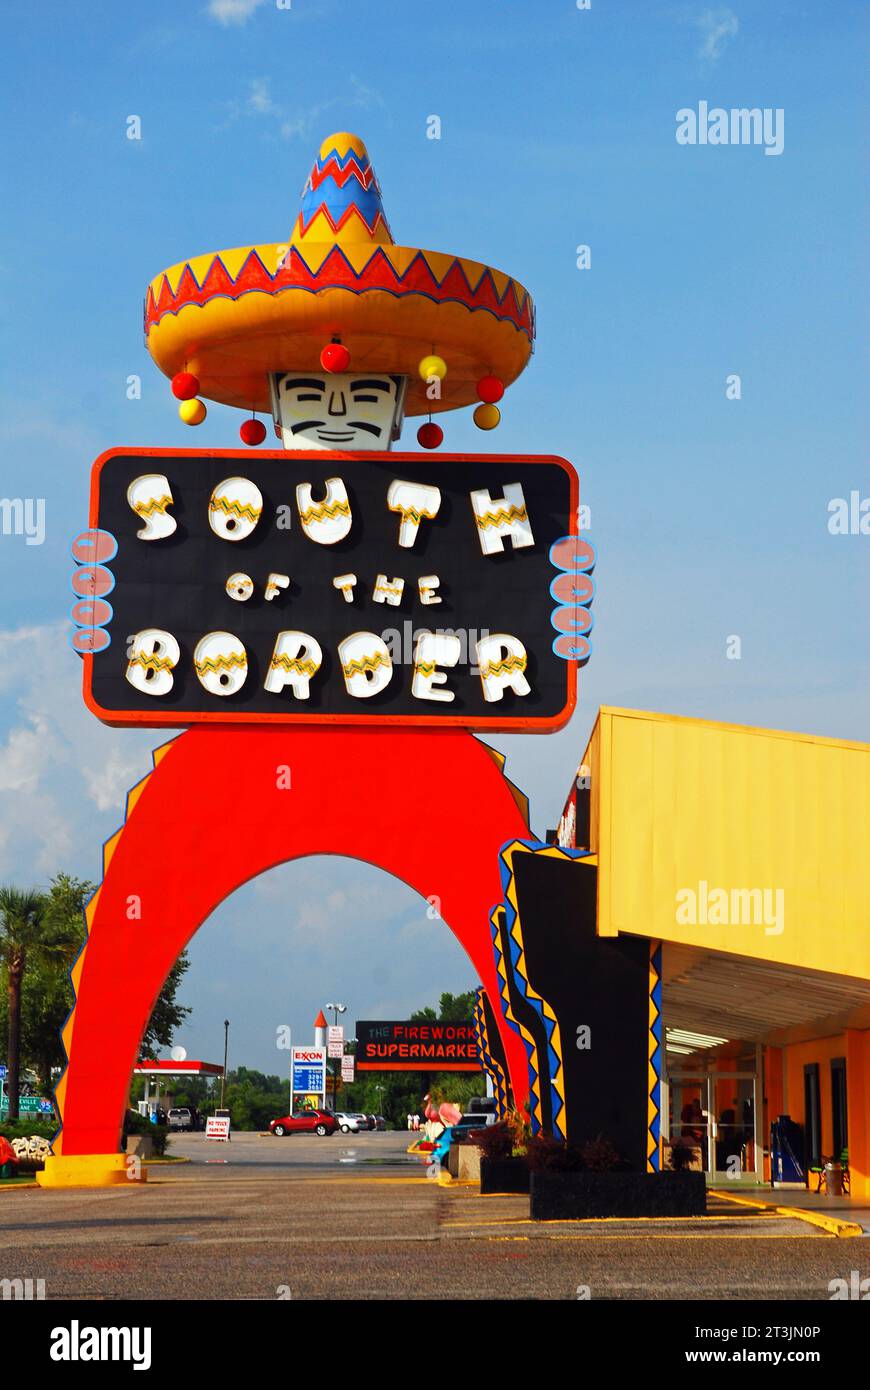 South of the Border, a controversial roadside attraction off the highway in South Carolina Stock Photo